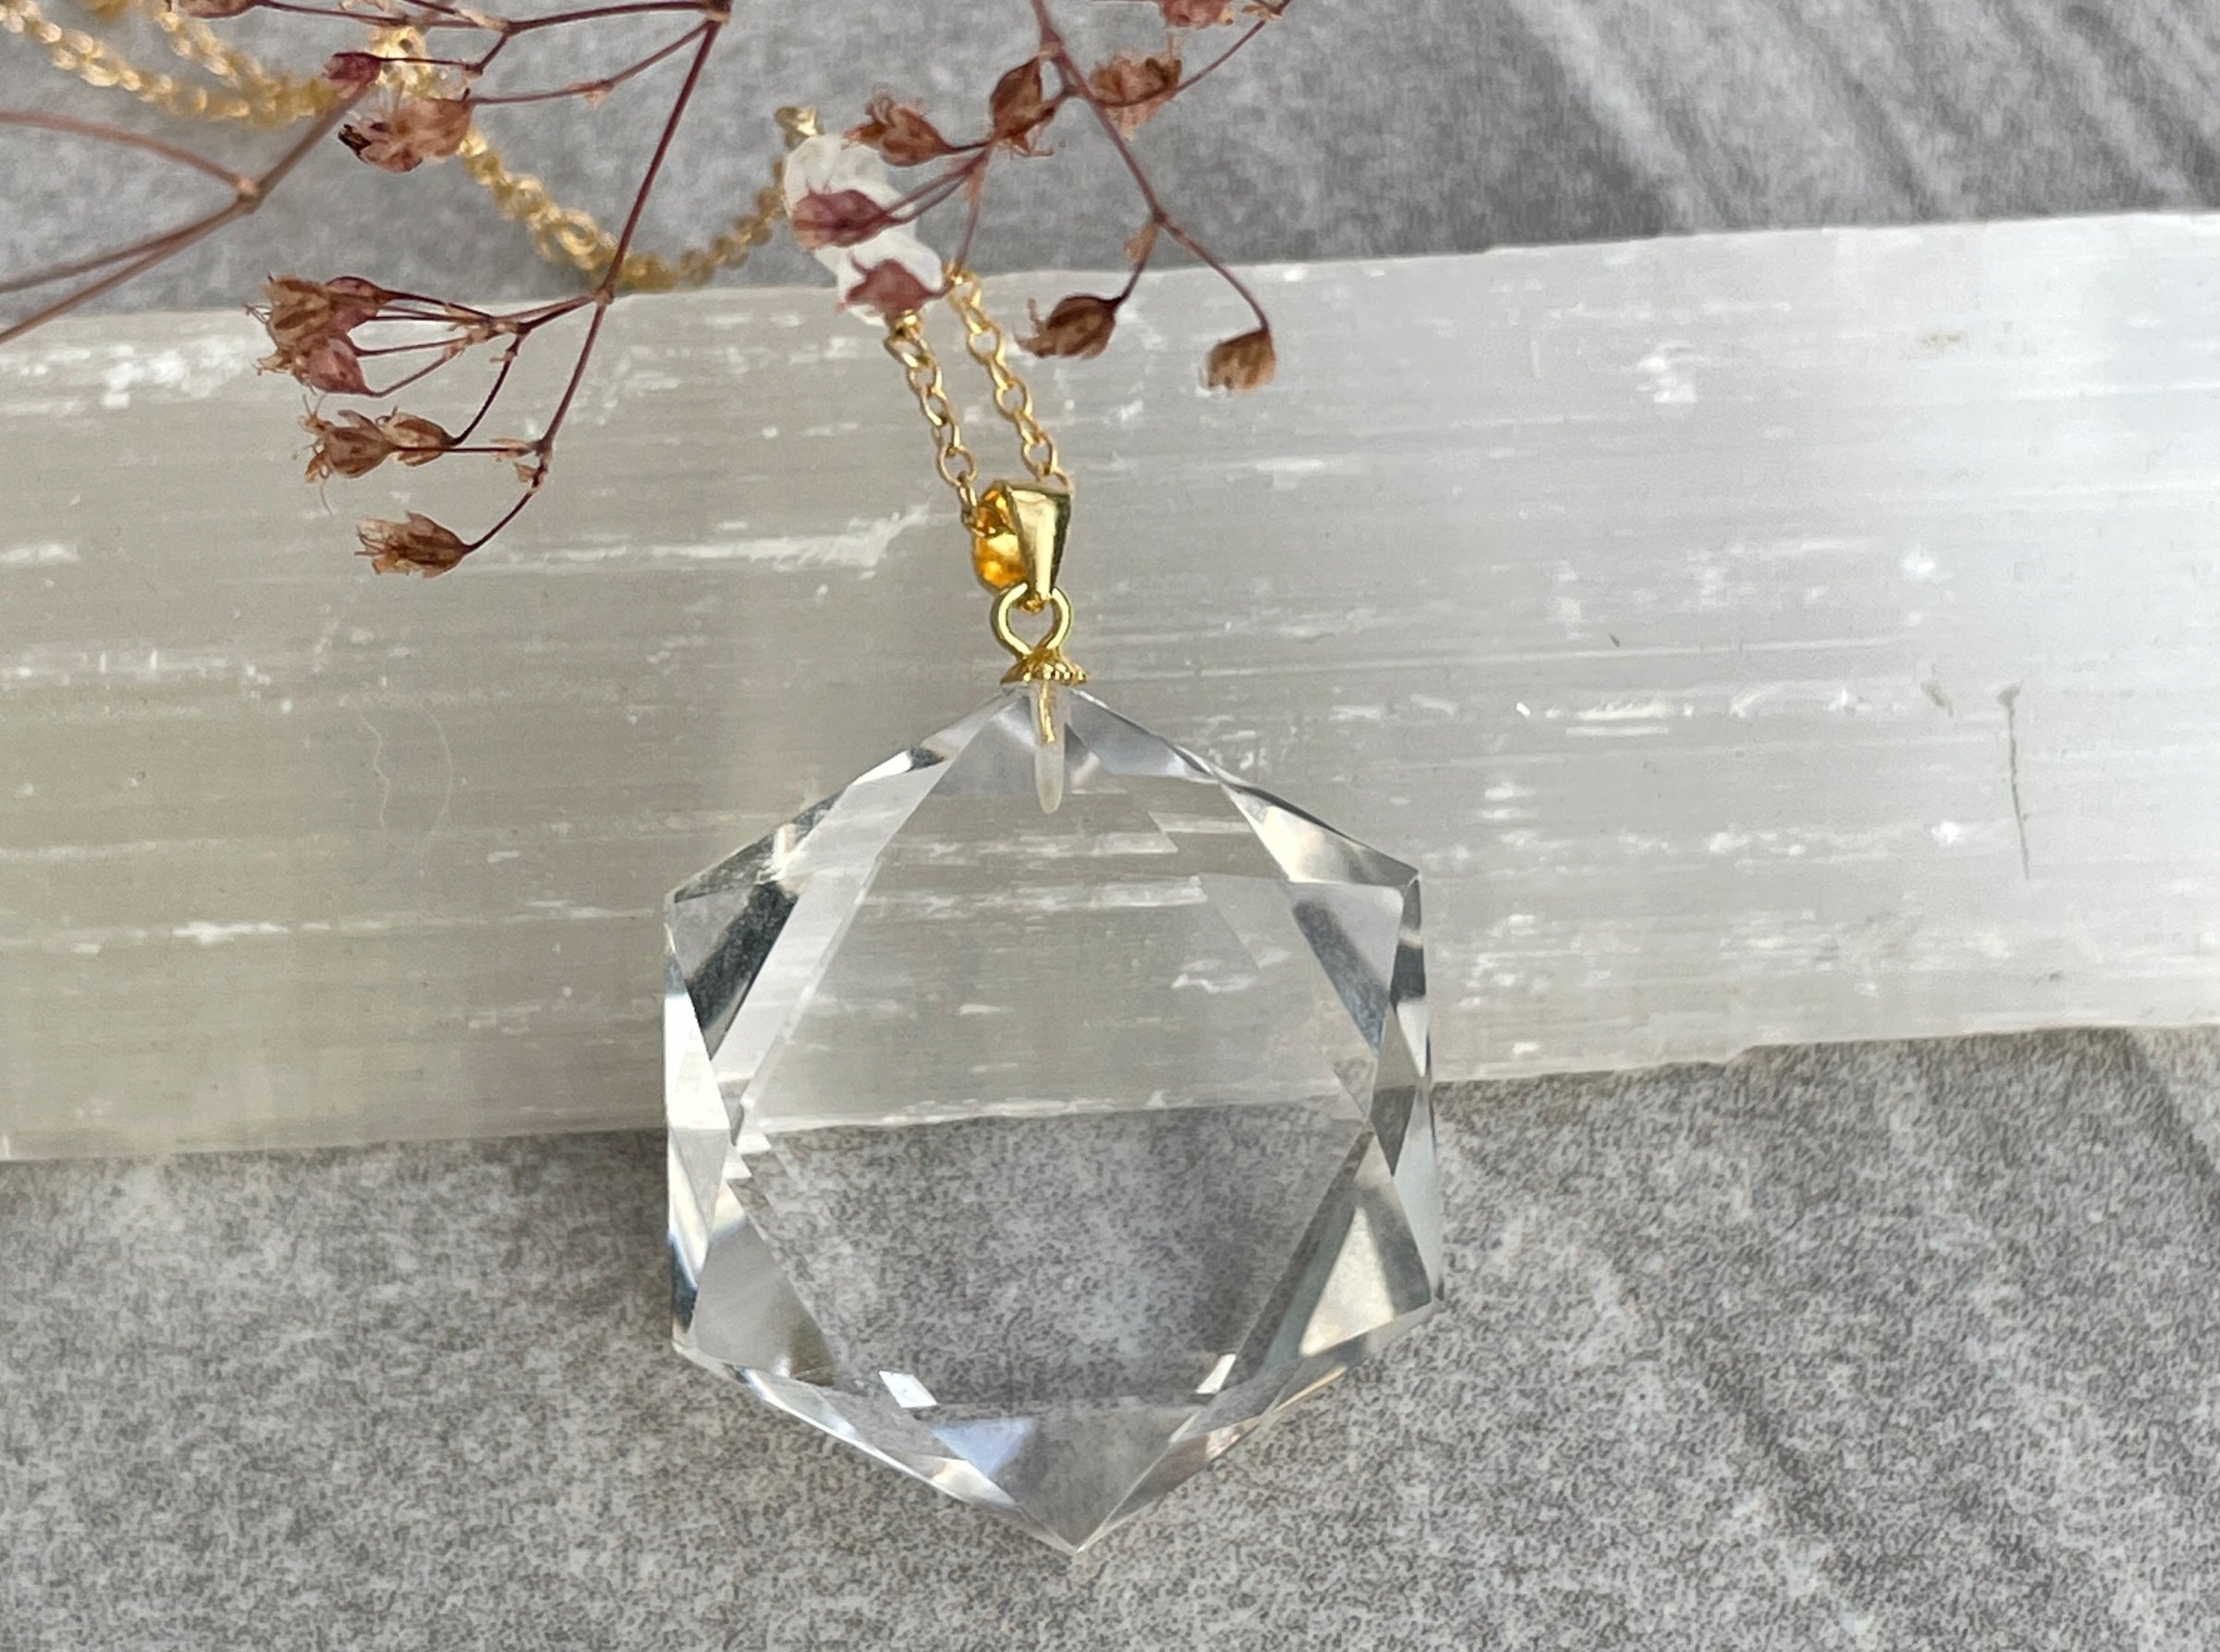 Clear Quartz Hexagon Crystal Necklace - choose sterling silver or gold filled | Aislinn Collection necklace Amanda K Lockrow